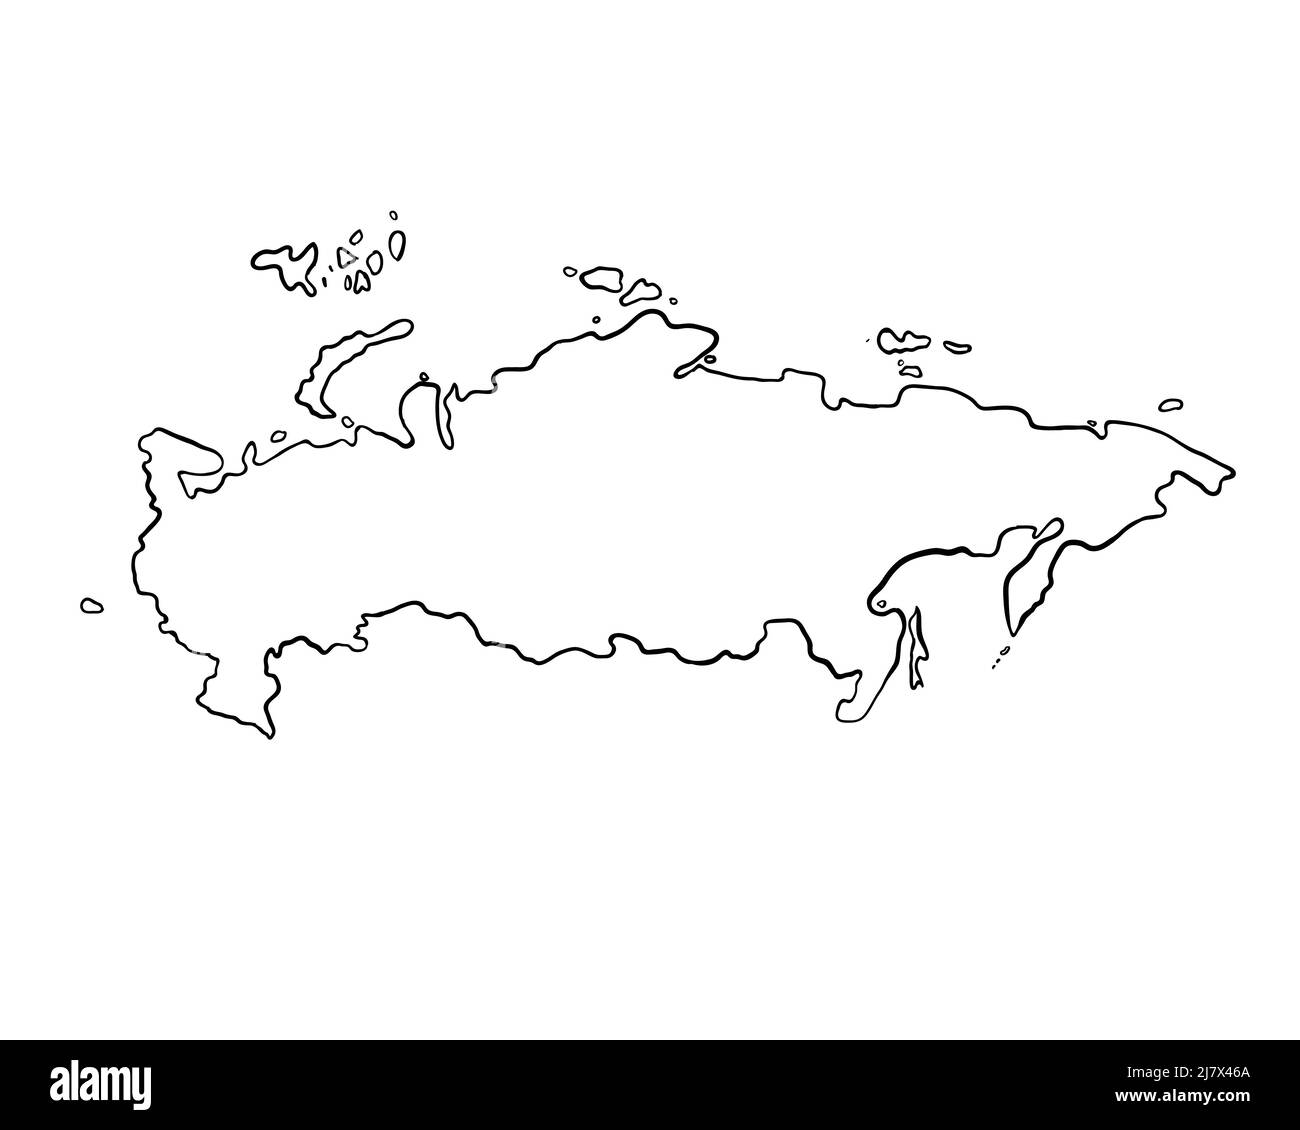 Russia - Hand-Drawn Map lllustration Stock Photo